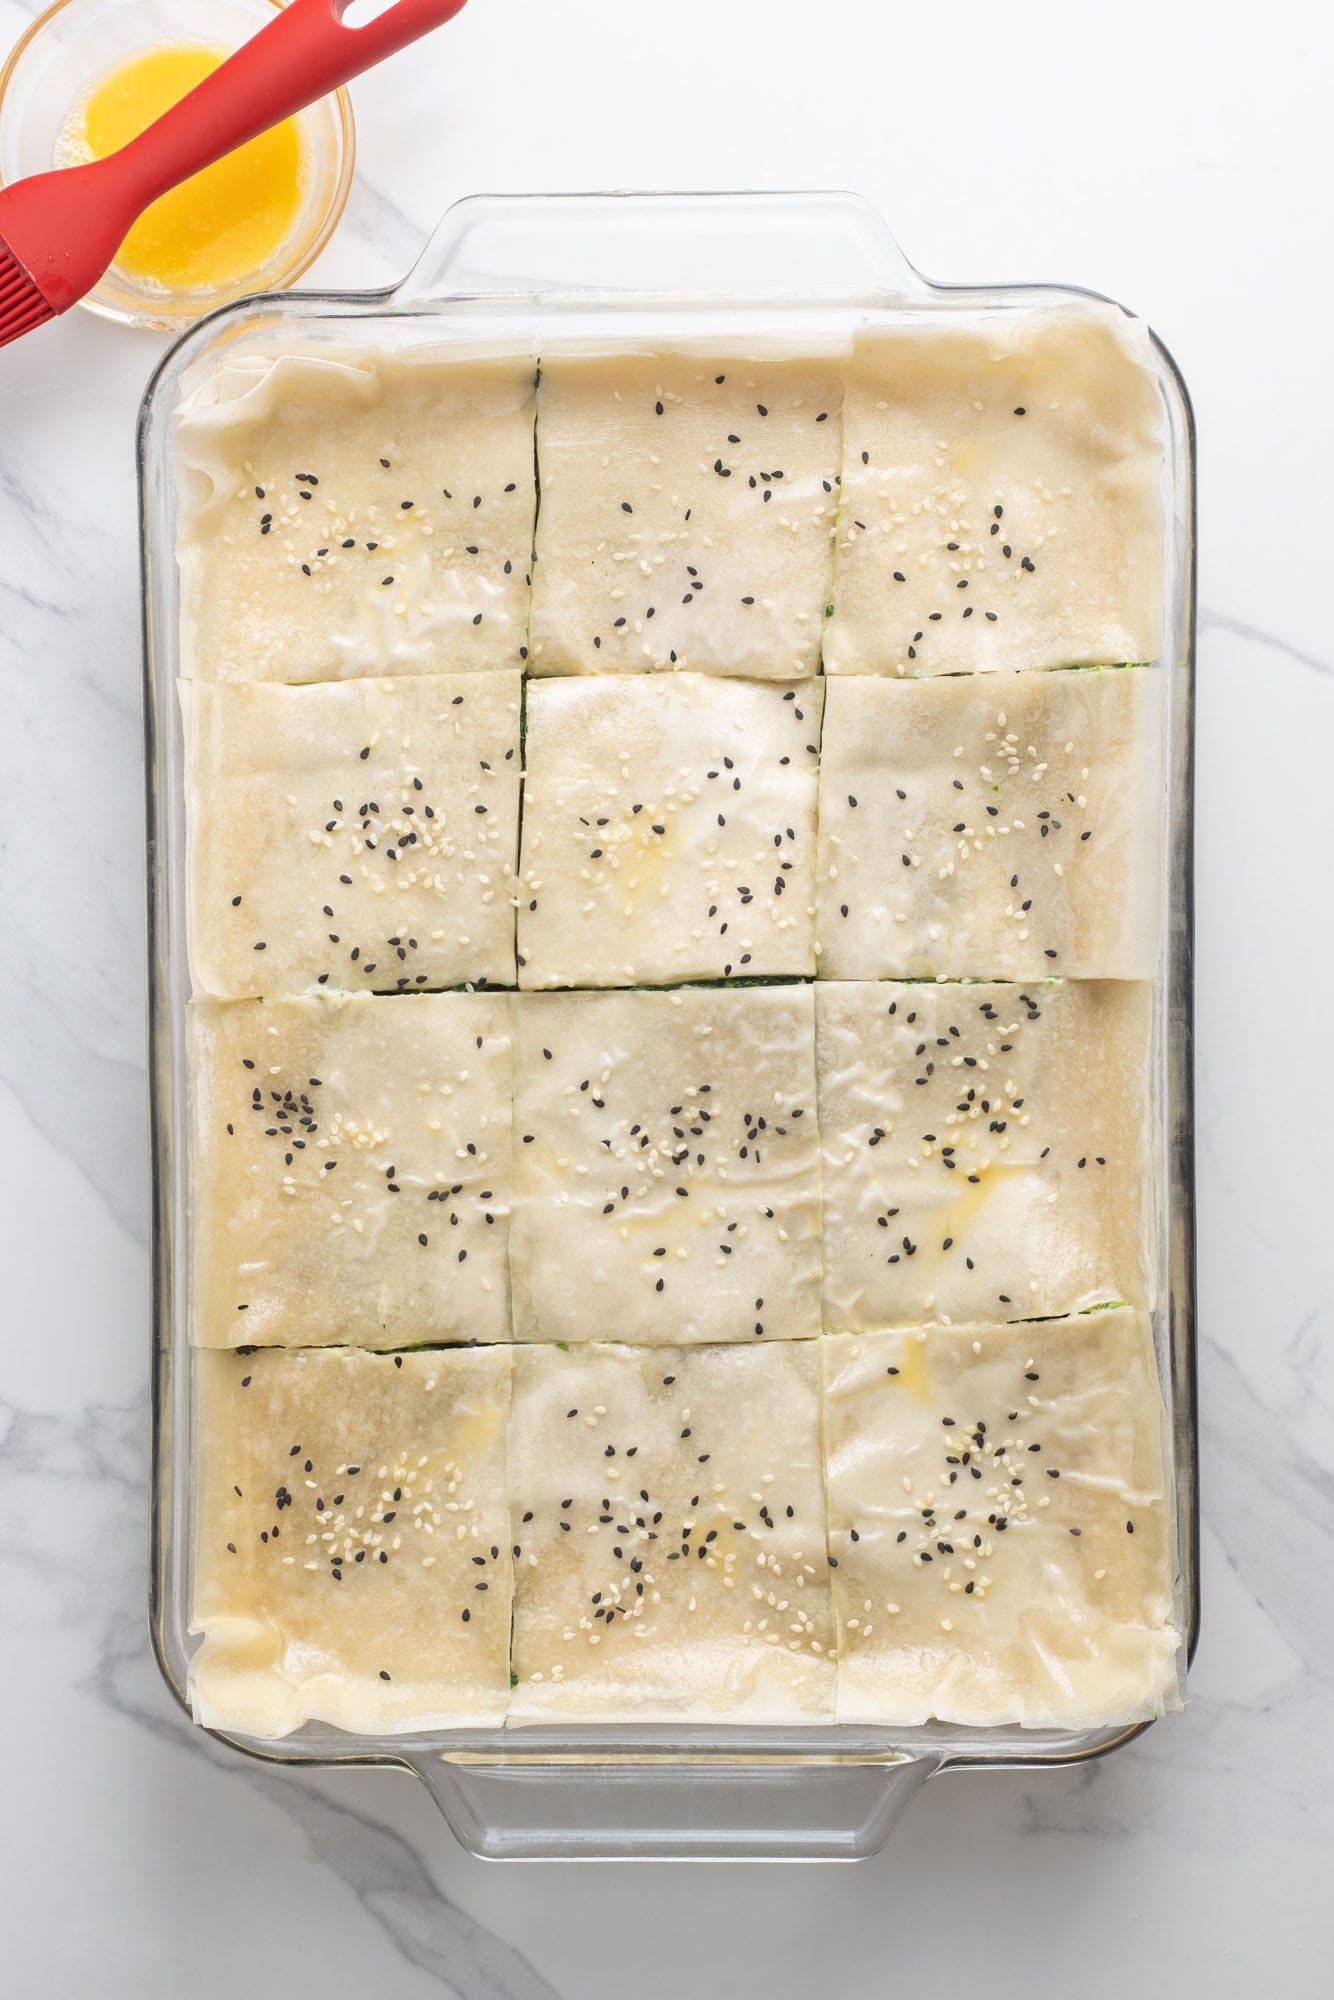 black and white sesame seeds on top of unbaked spanakopita